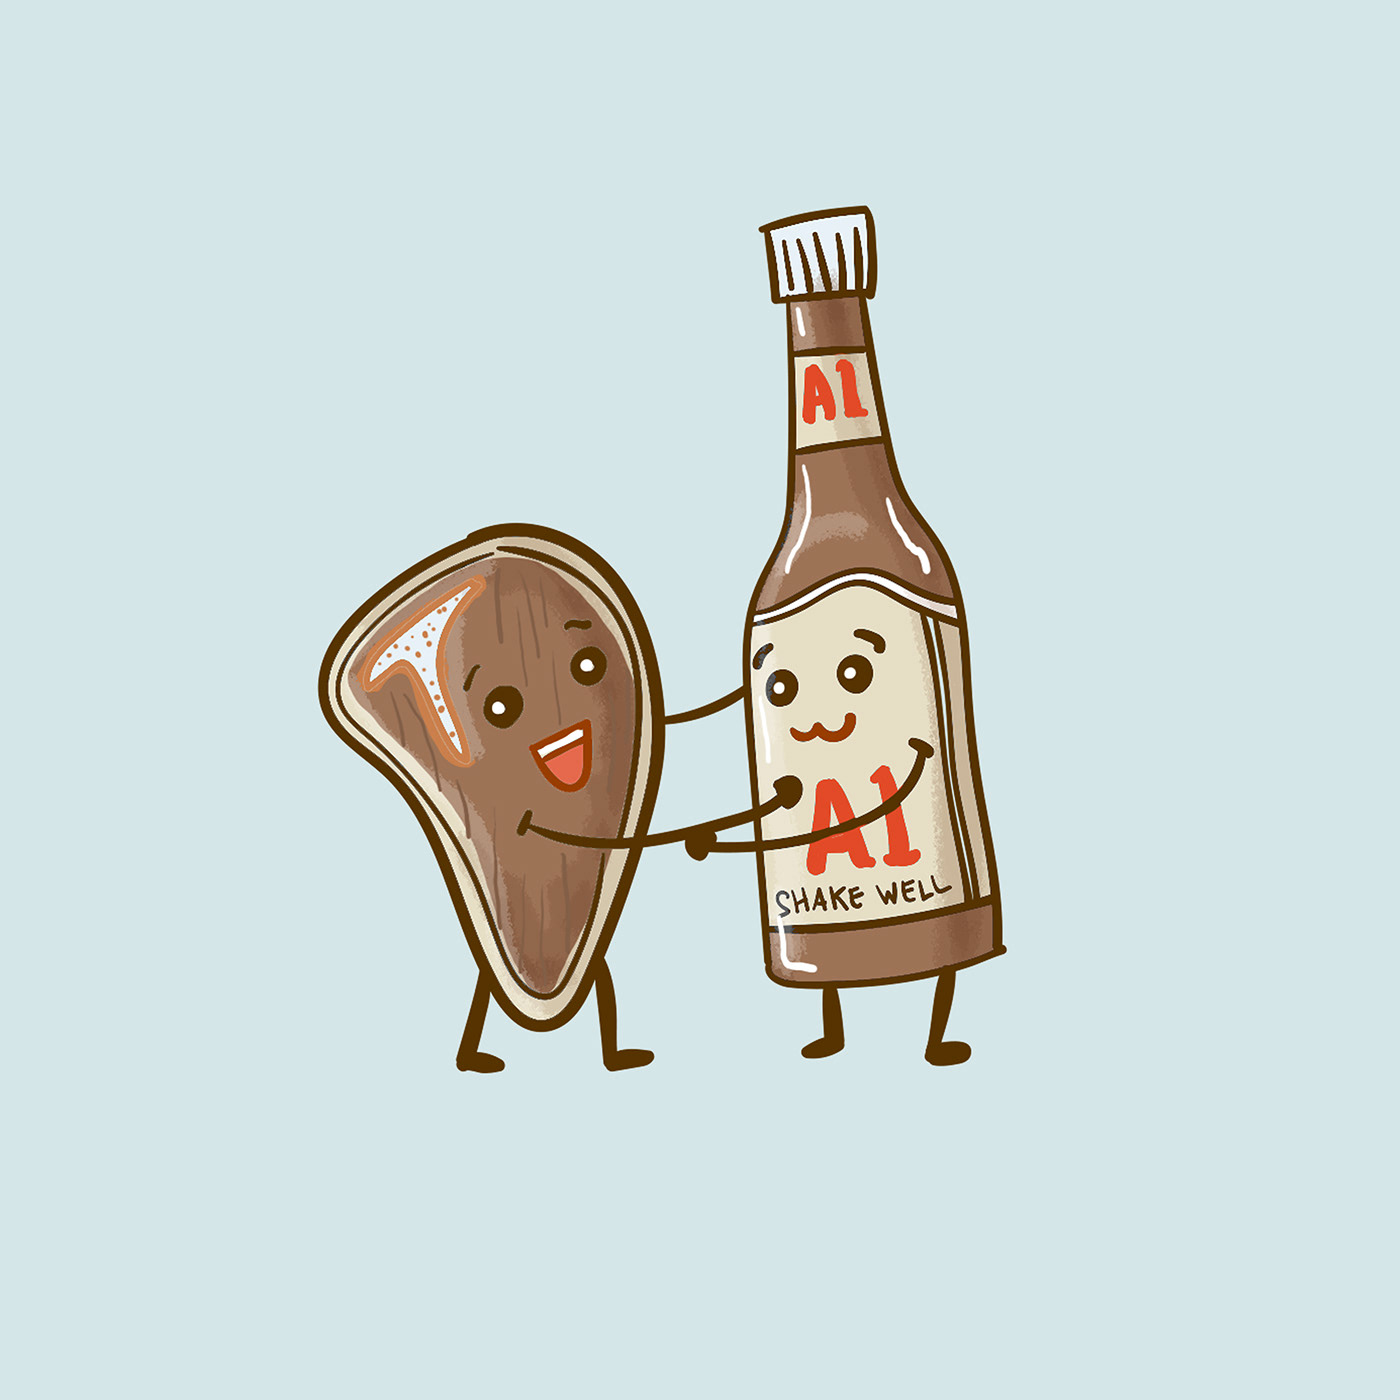 Image of steak and a1 sauce holding hands